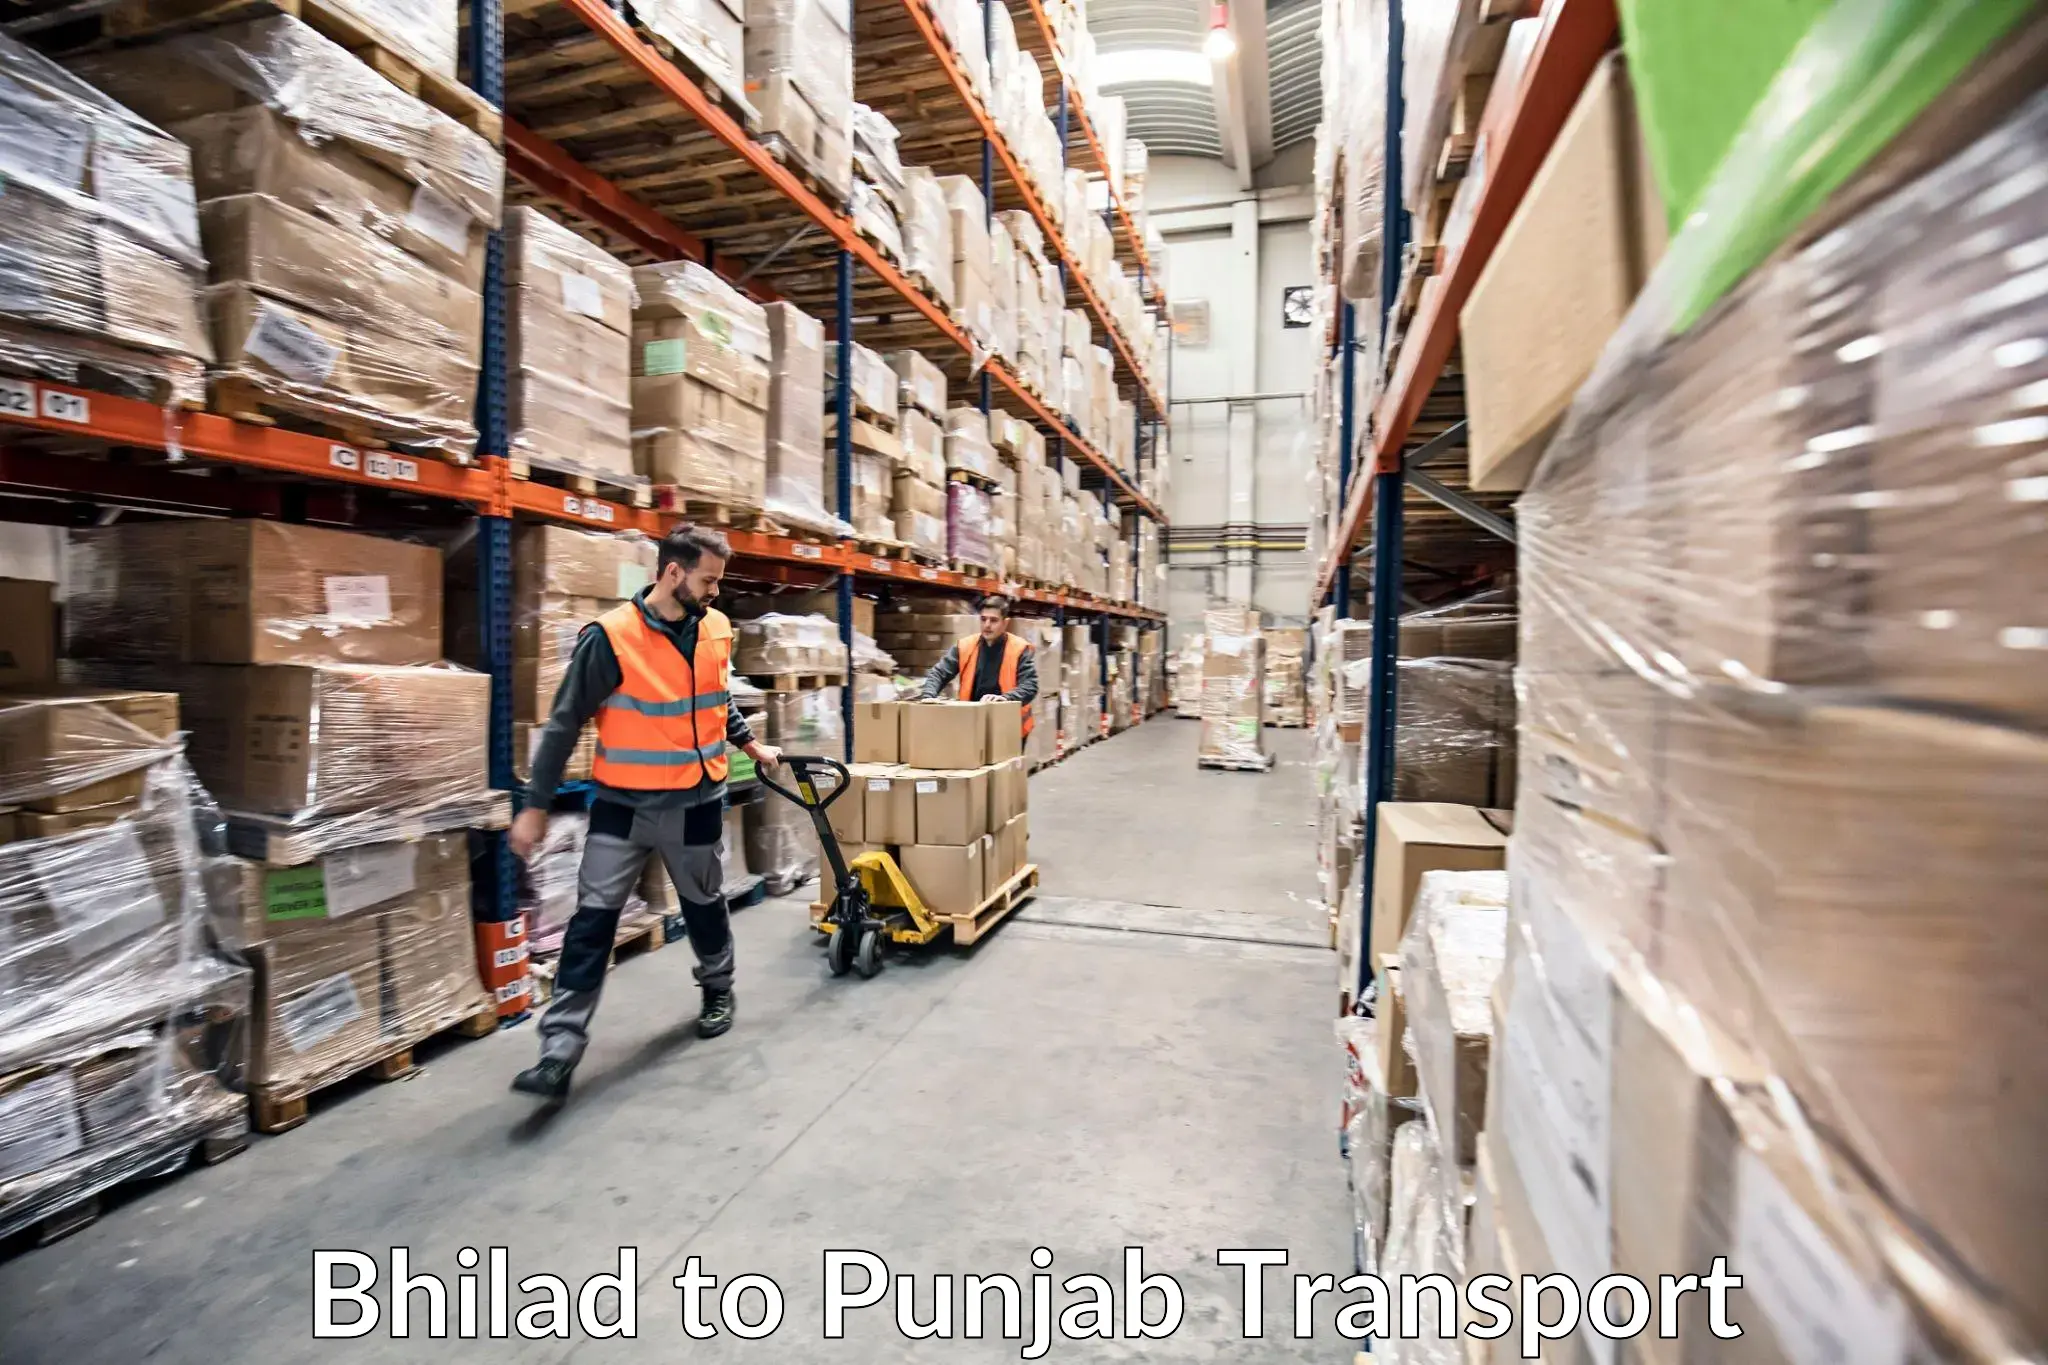 Truck transport companies in India in Bhilad to Khanna